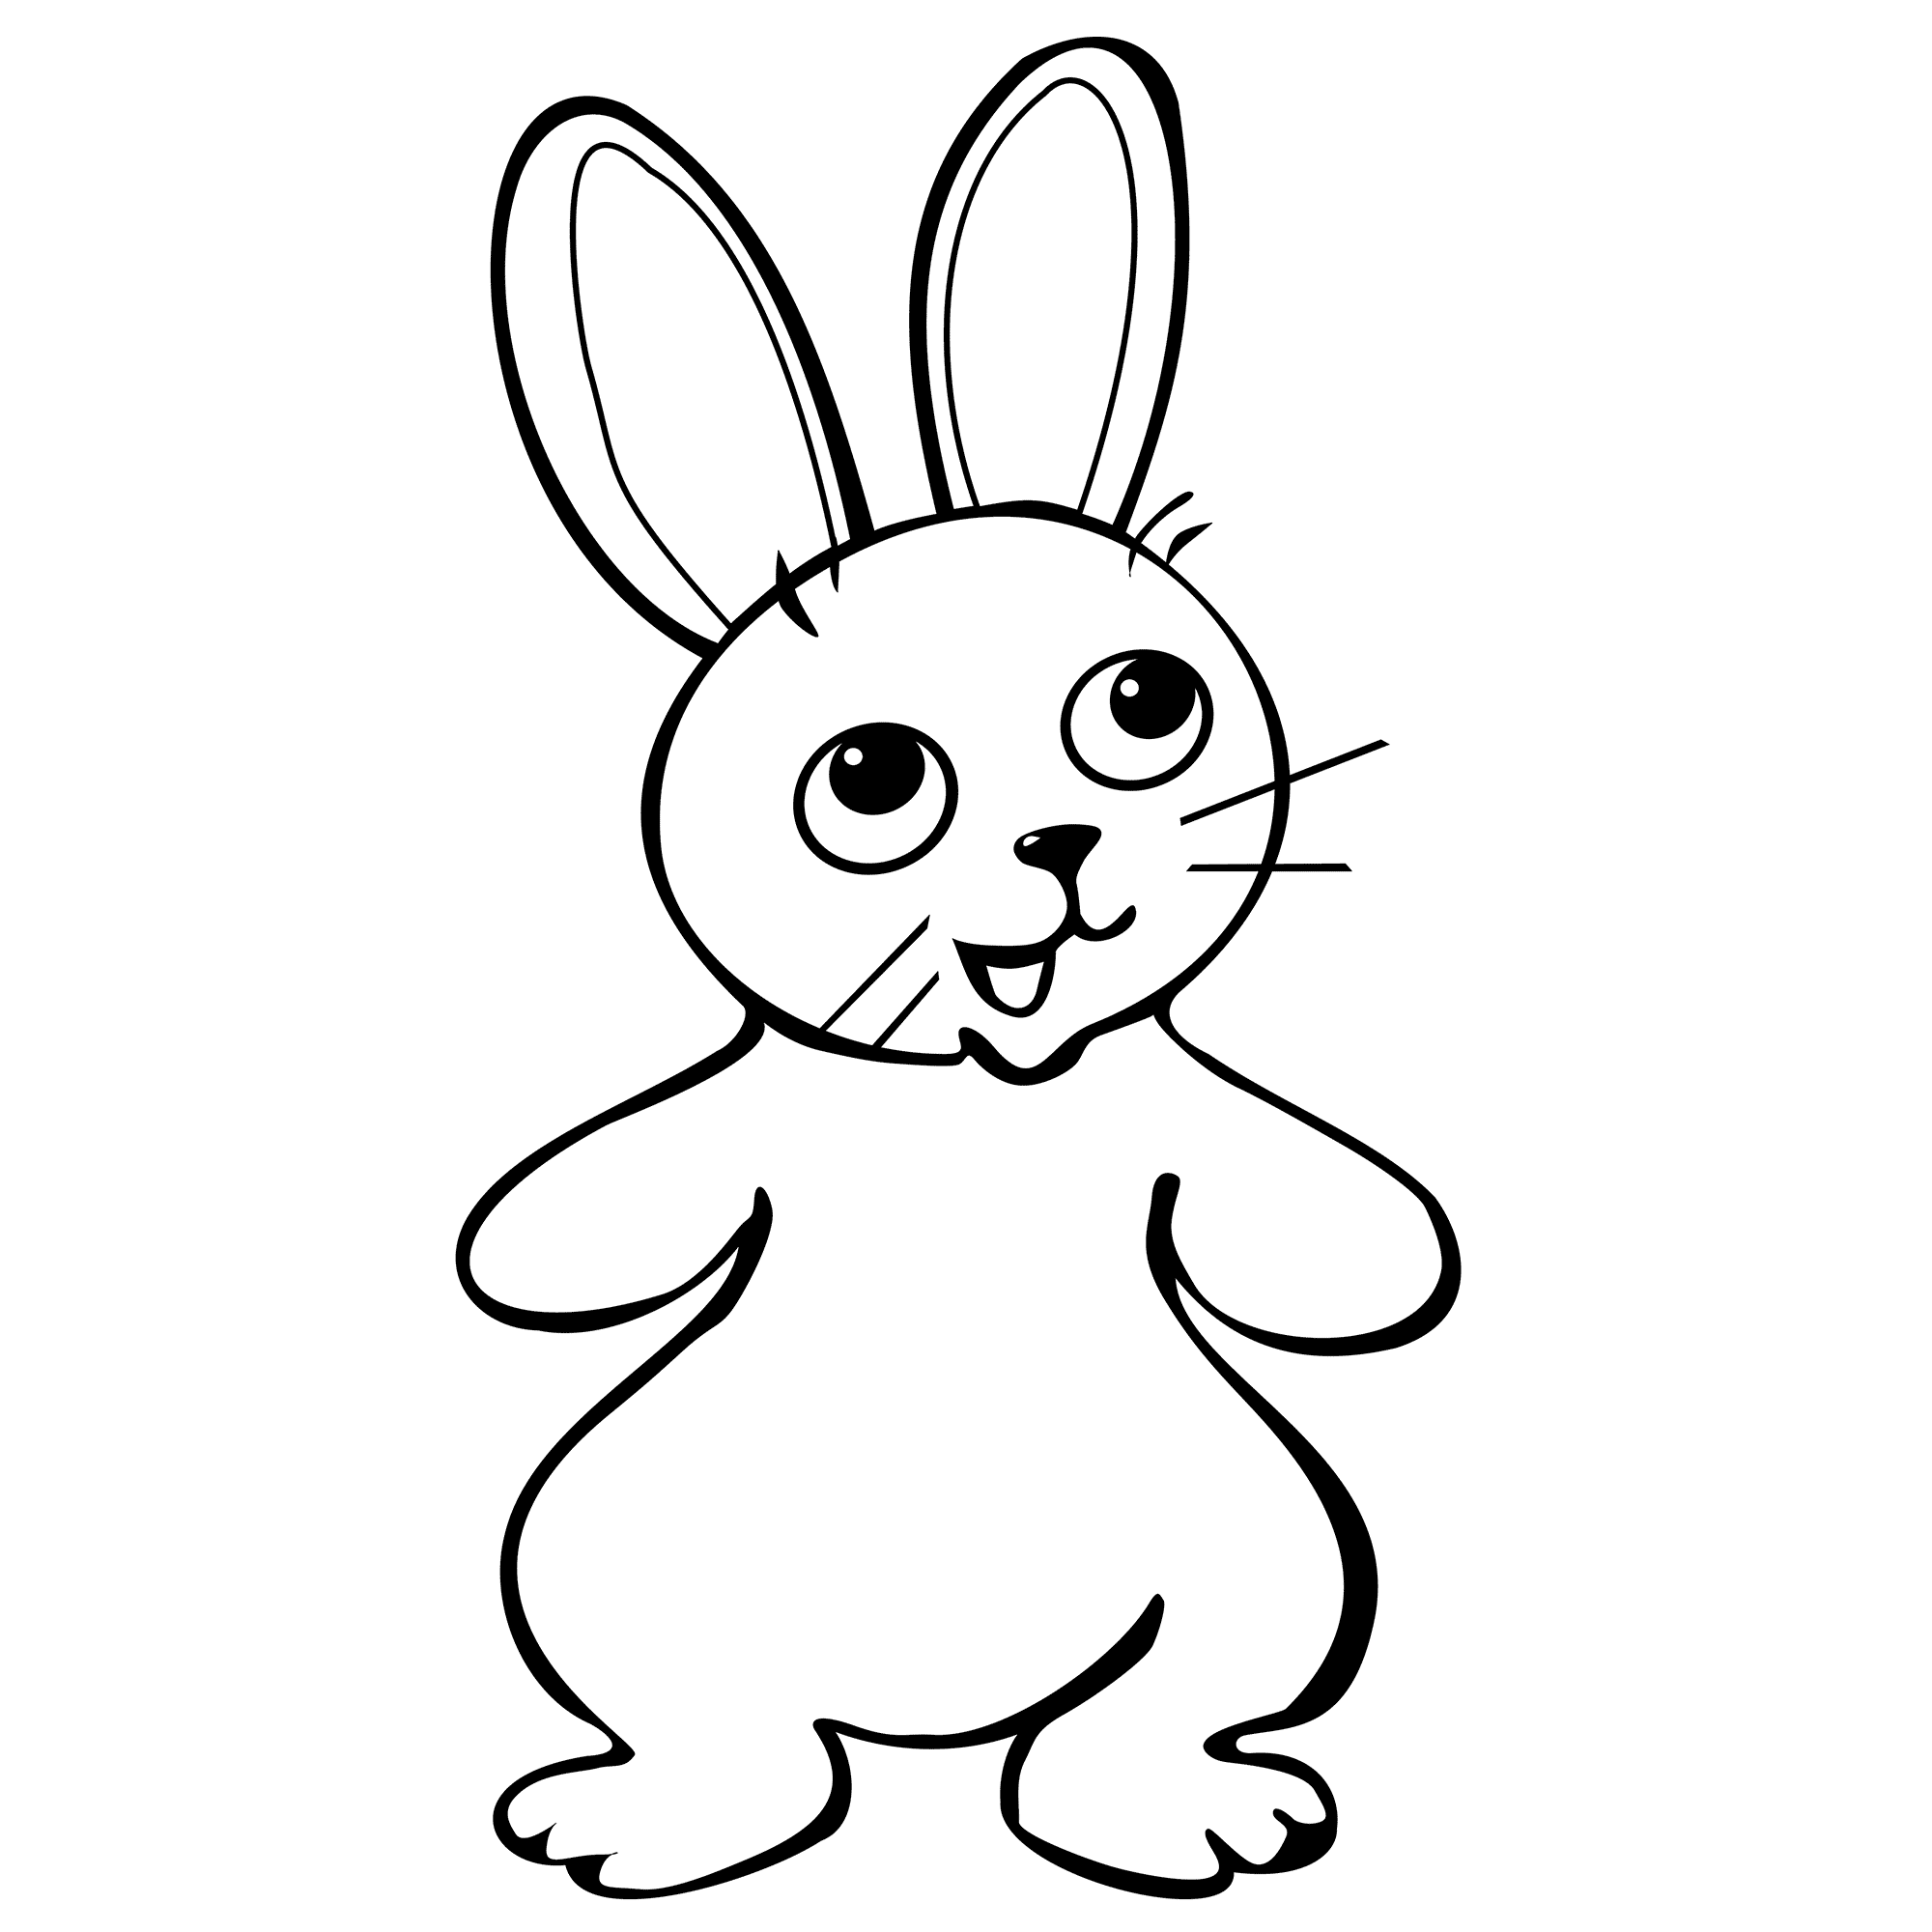 pictures of rabbits for kids images of baby rabbit drawings baby birds bunnies for kids pictures of rabbits 